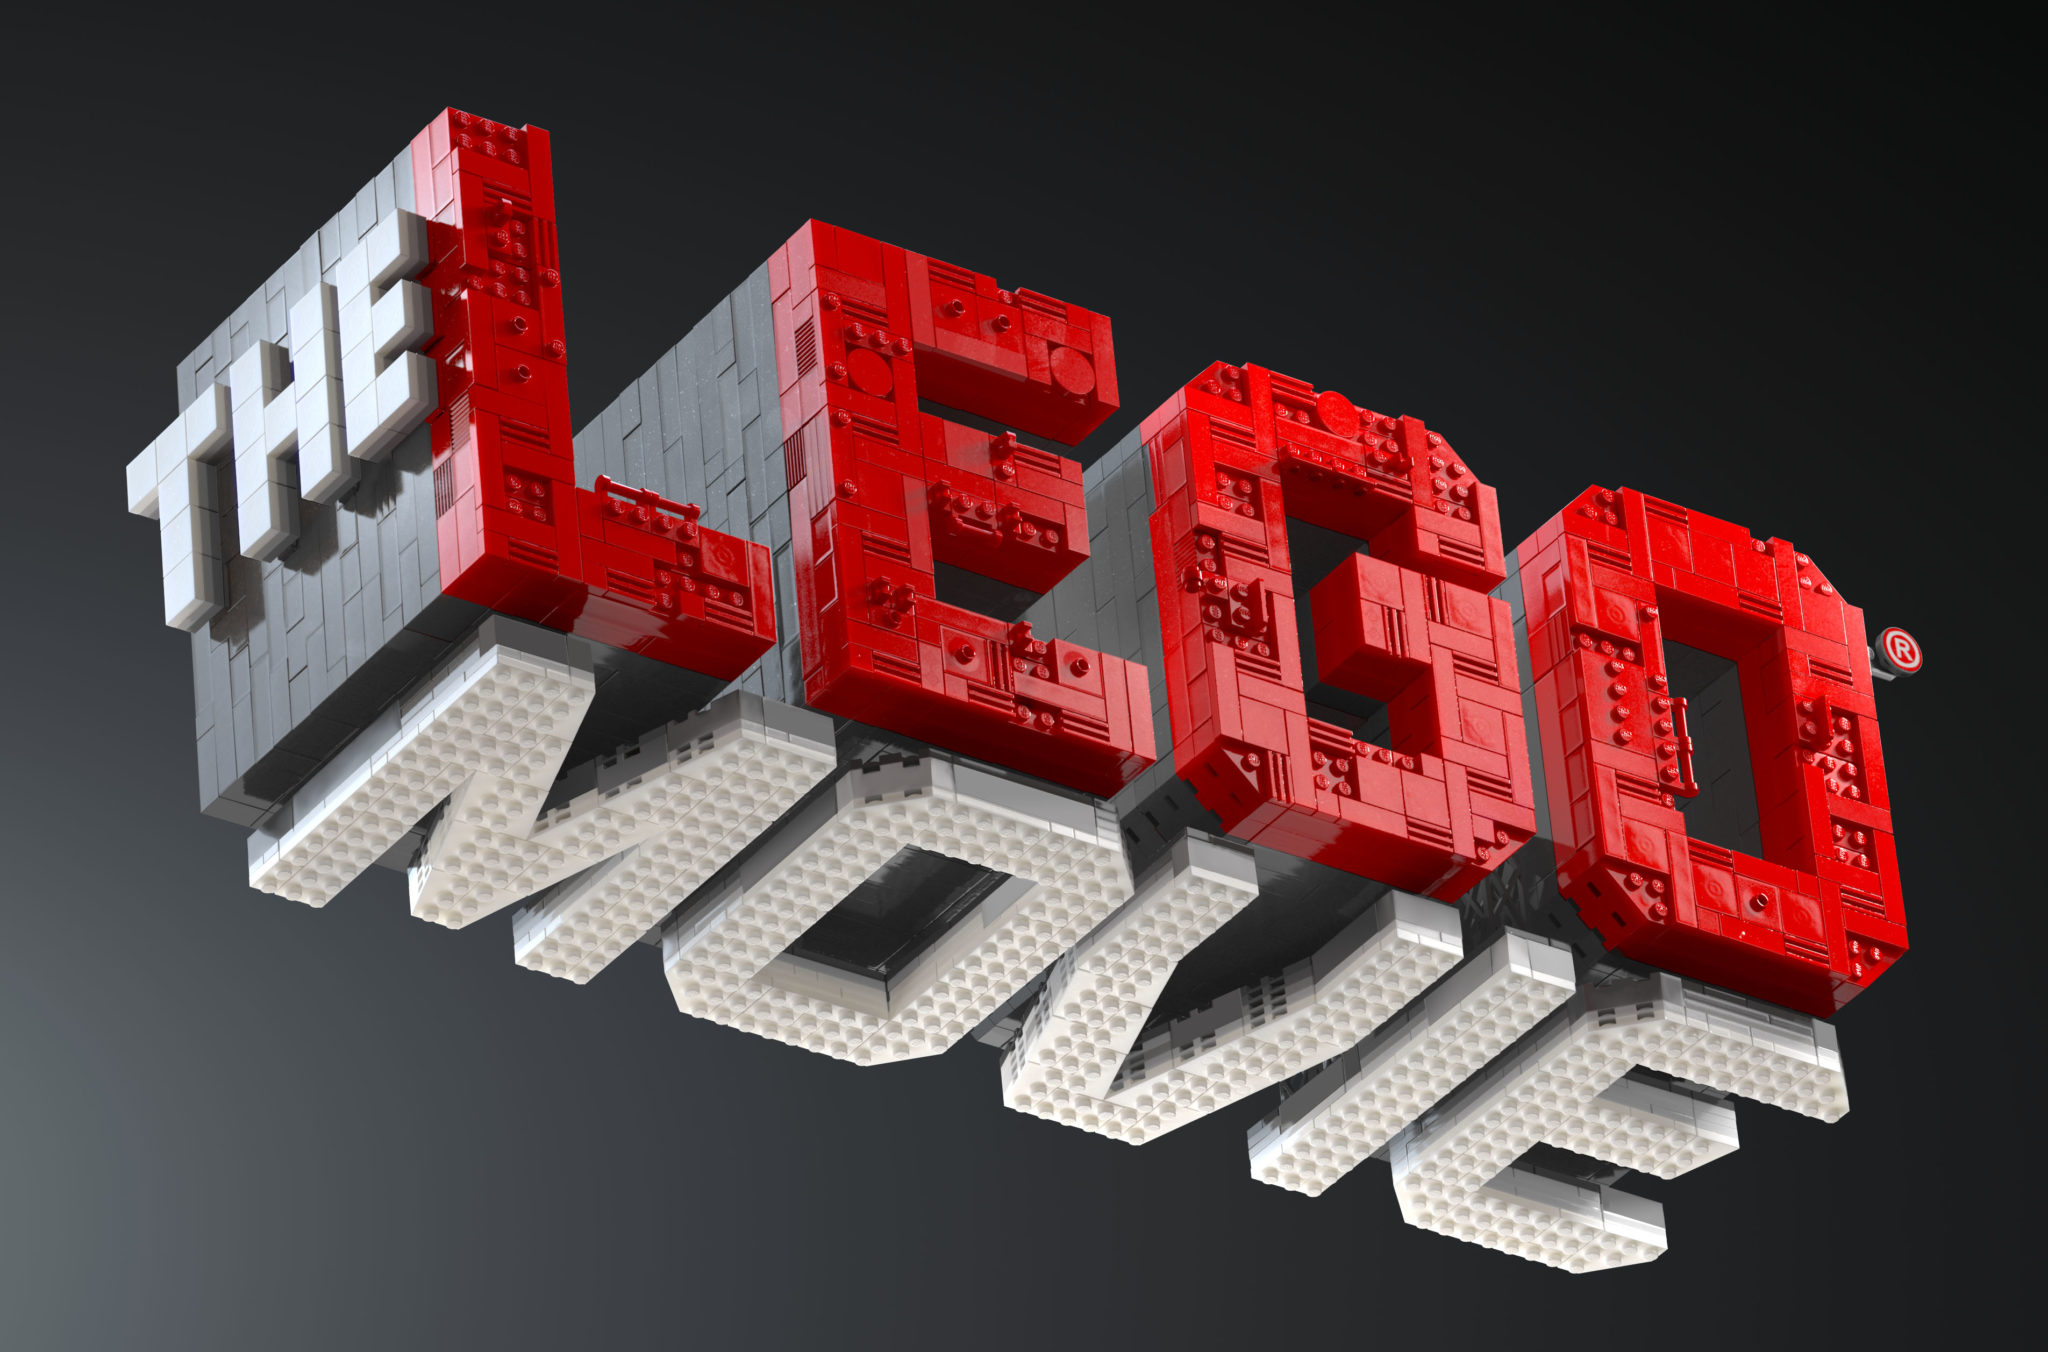 The Lego Movie 2' has a title and a release date